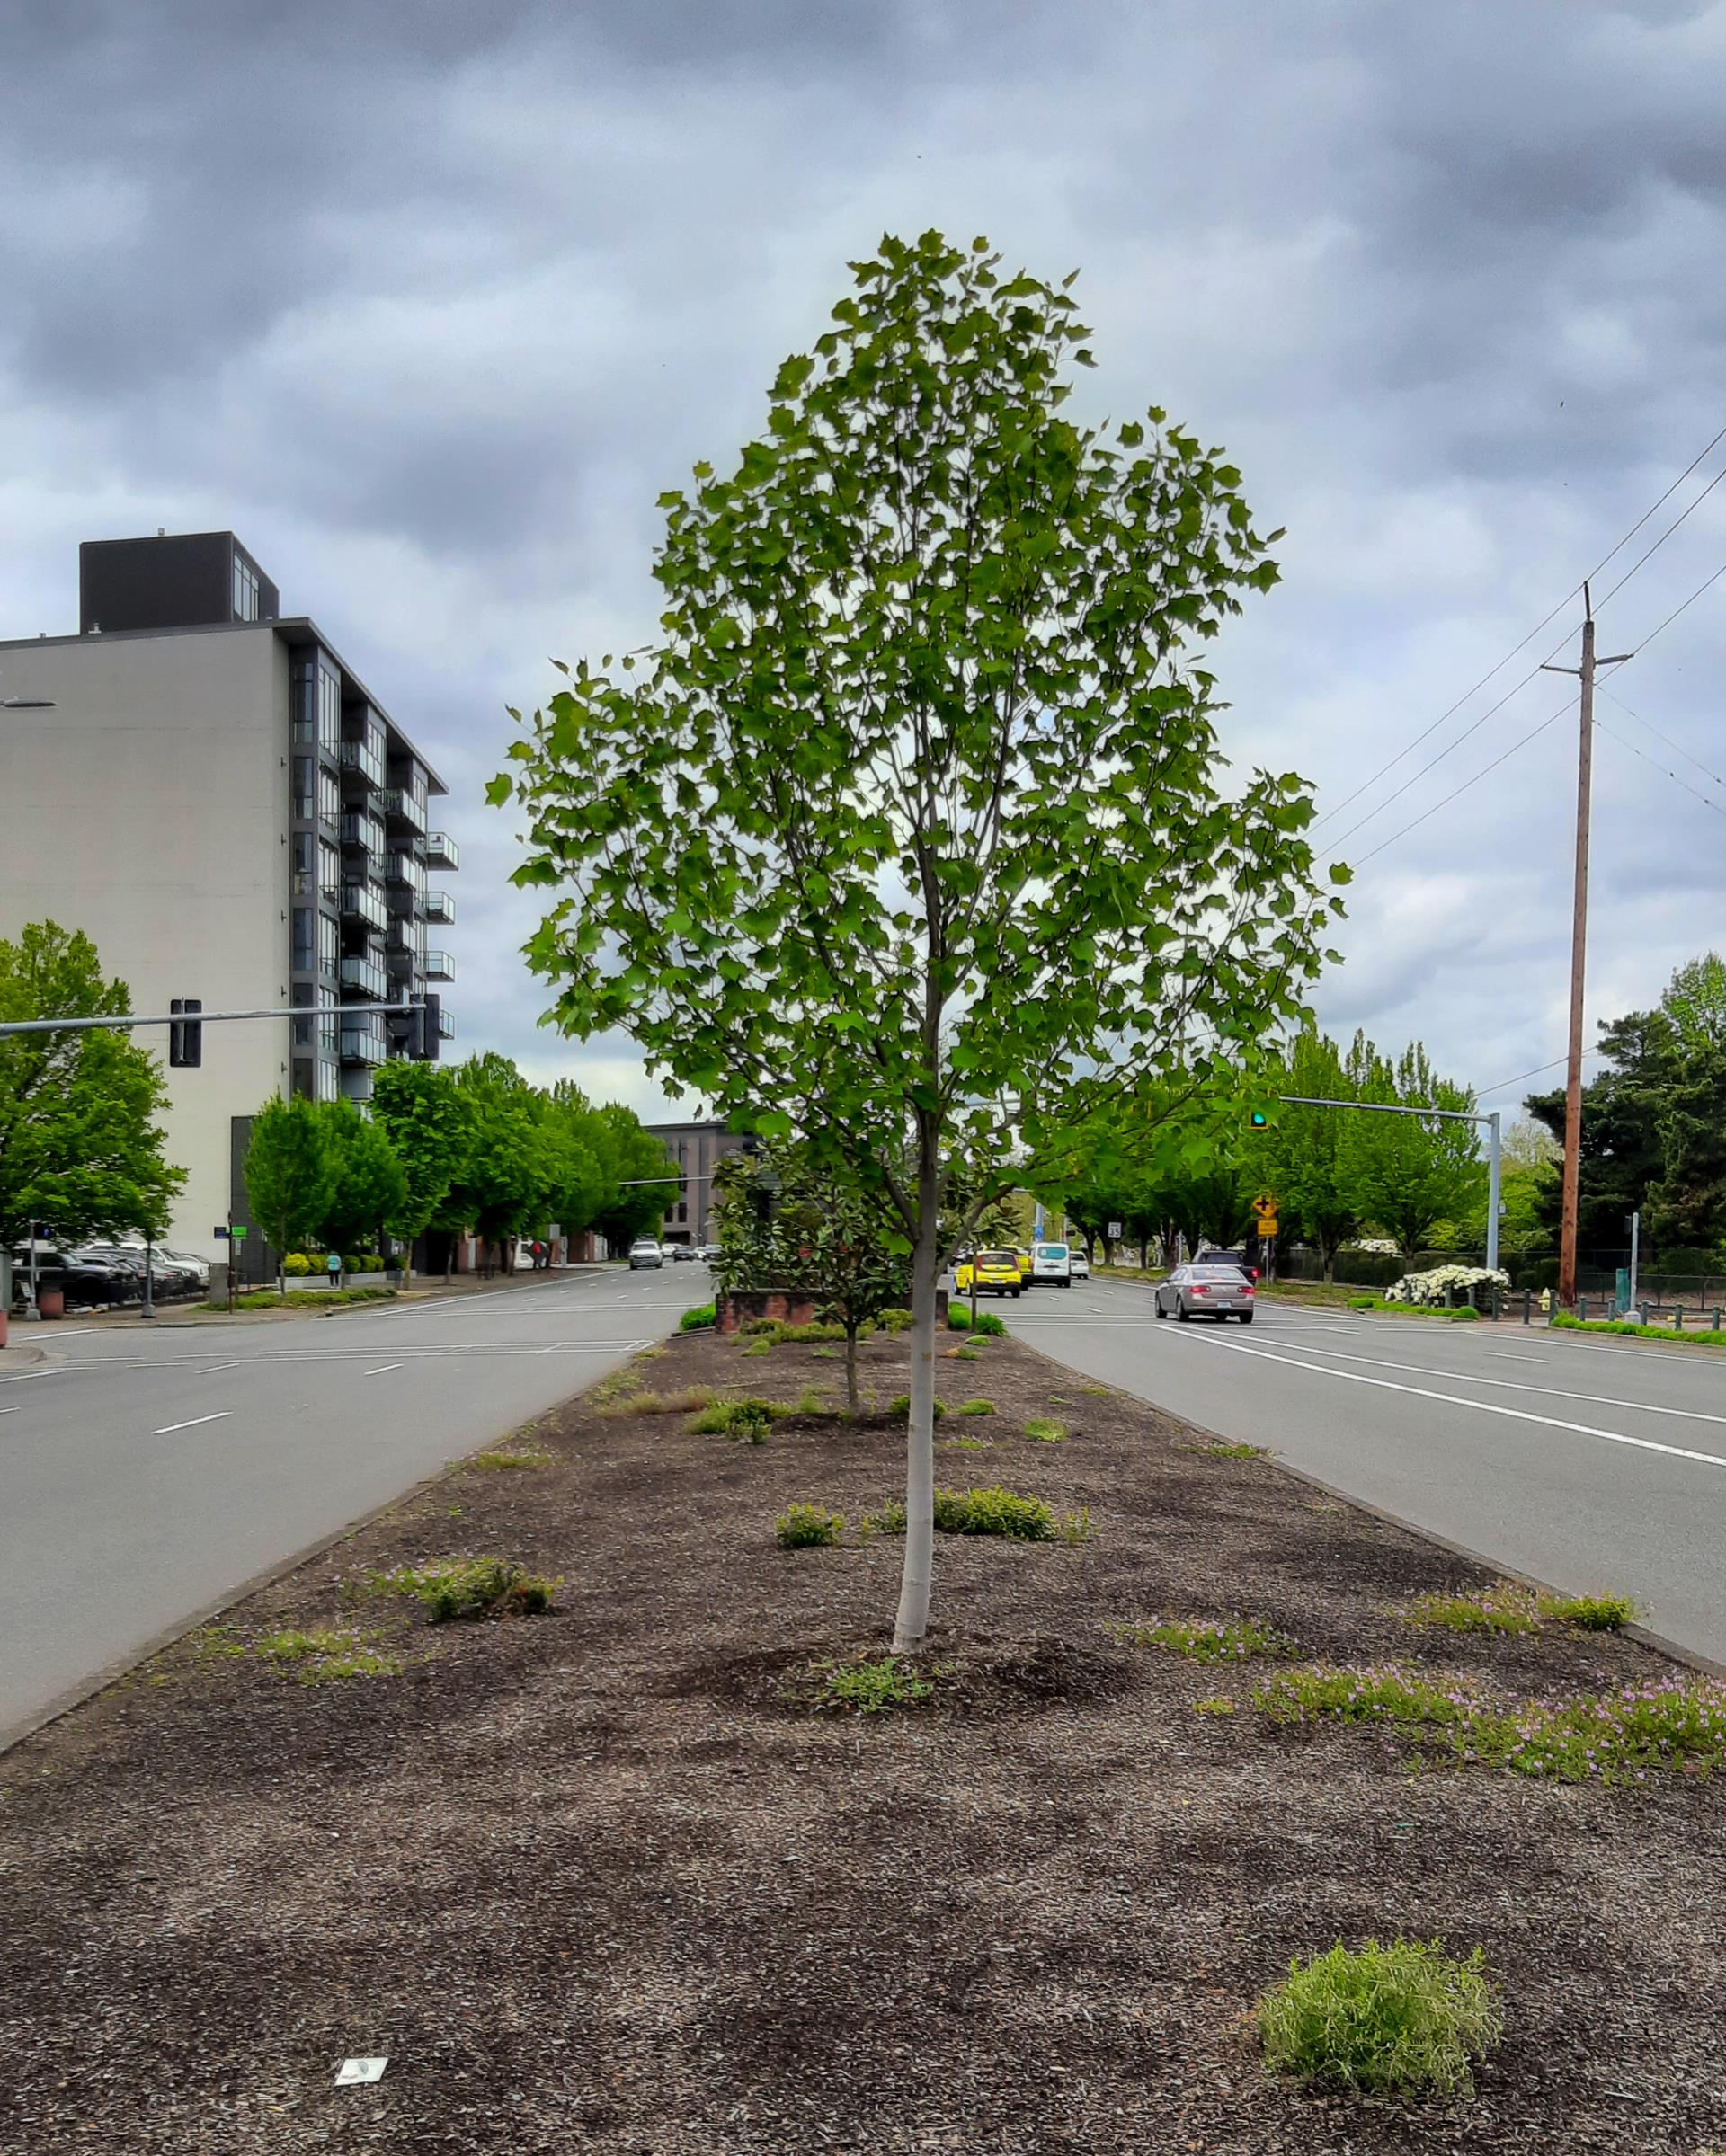 example of a median tree planting